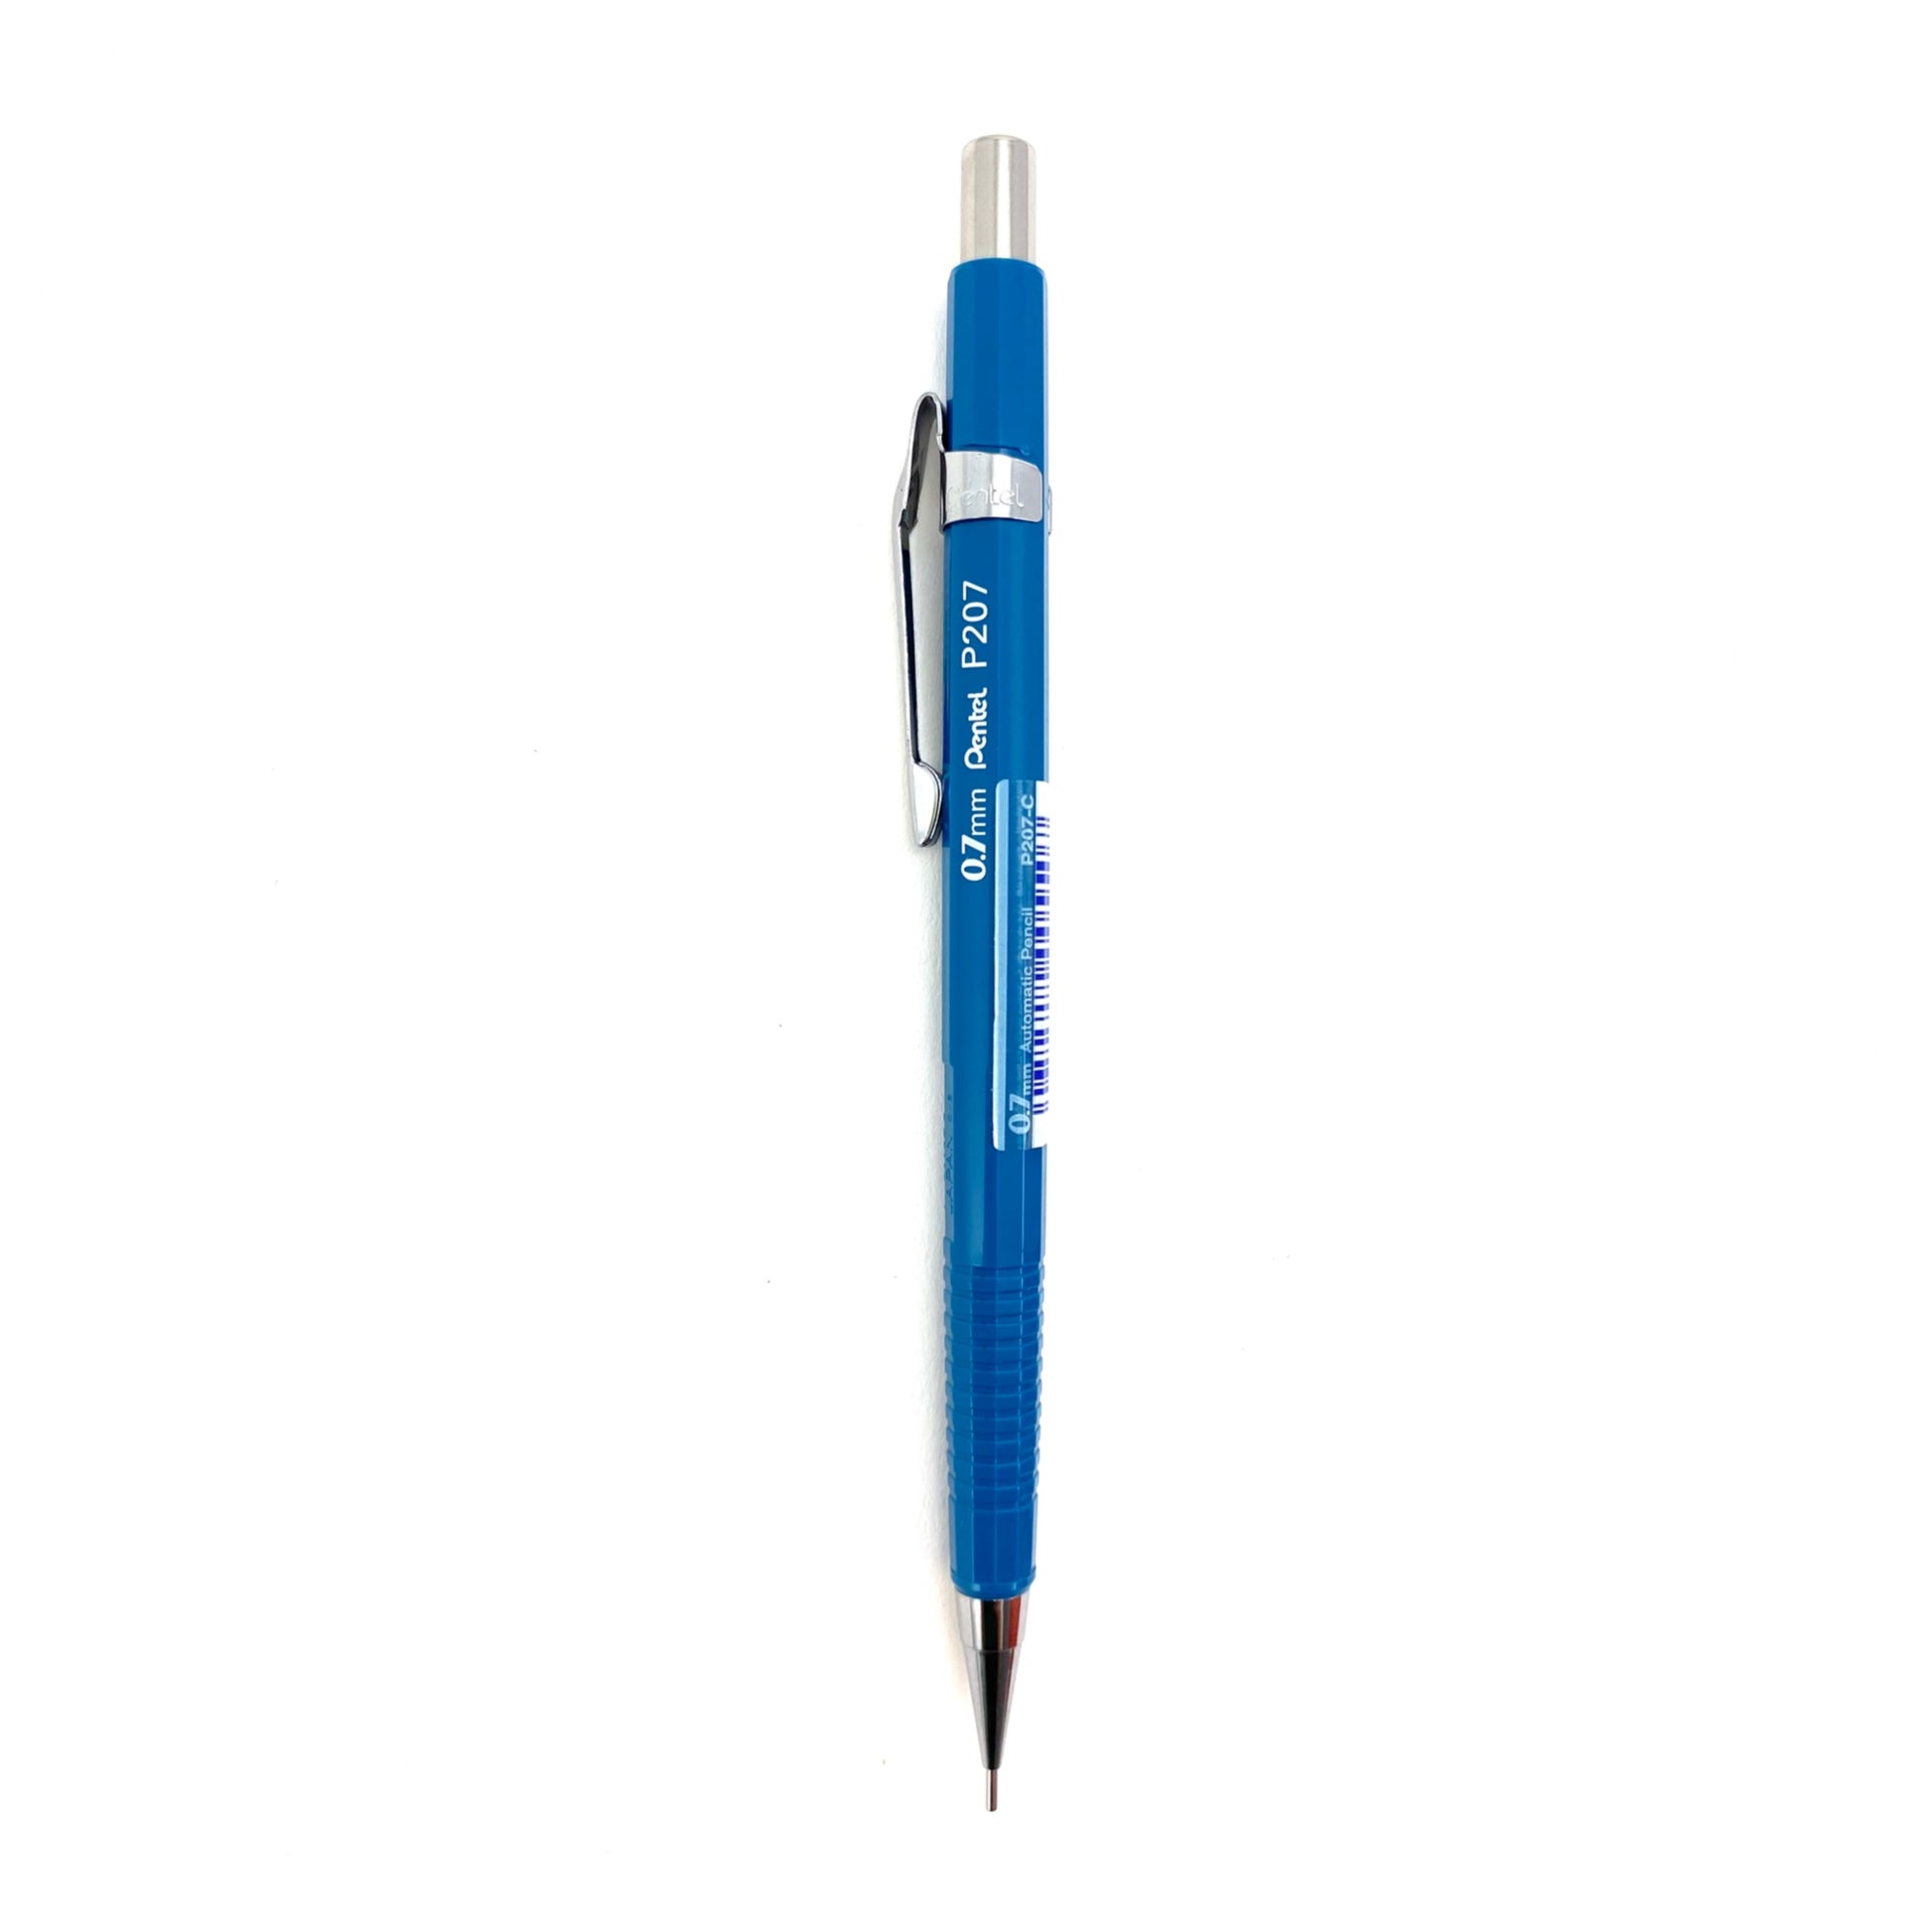 Pentel GraphGear 500 Refillable Automatic Pencil - 4-Pack of Mechanical Pencils Include - 0.3mm, 0.5mm, 0.7mm & 0.9mm Lead Sizes